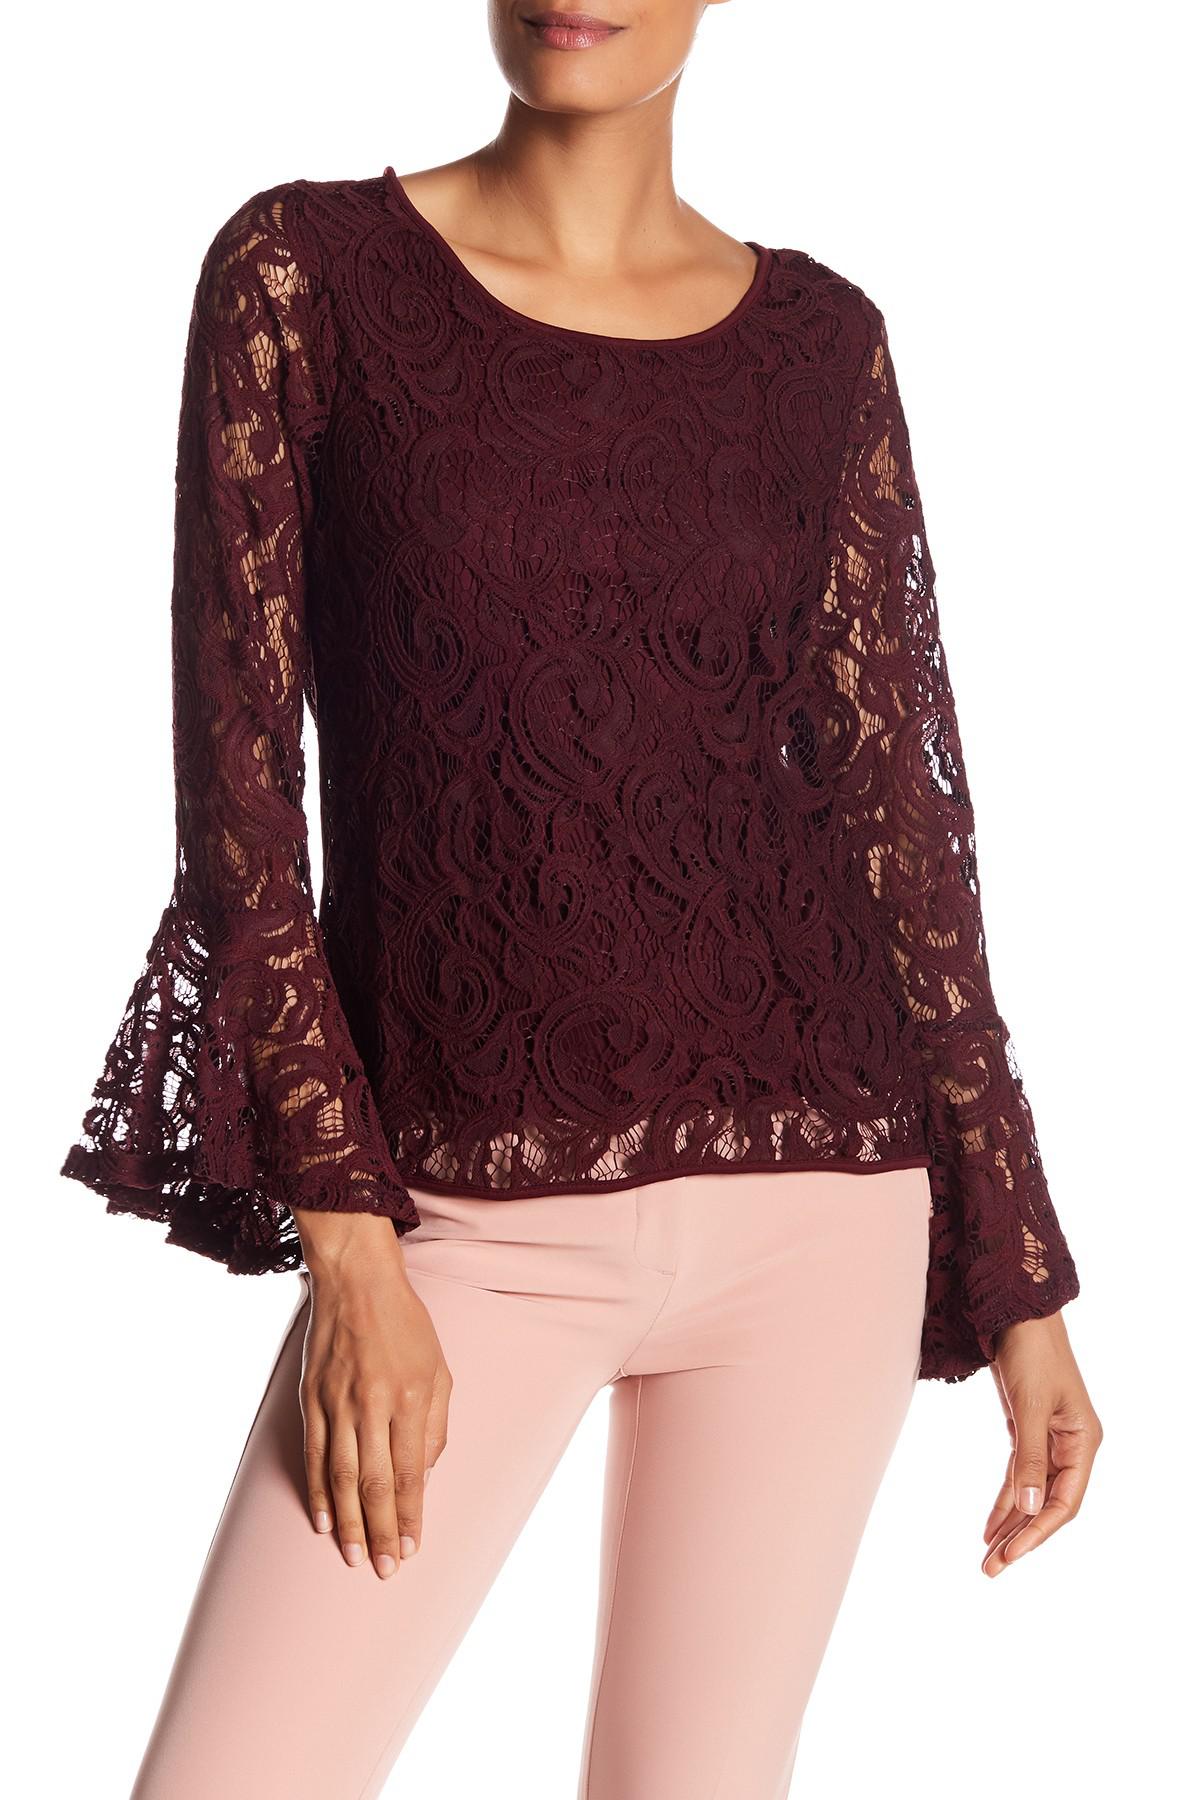 Adrianna Papell Lace Dramatic Bell Sleeve Blouse in Purple - Lyst